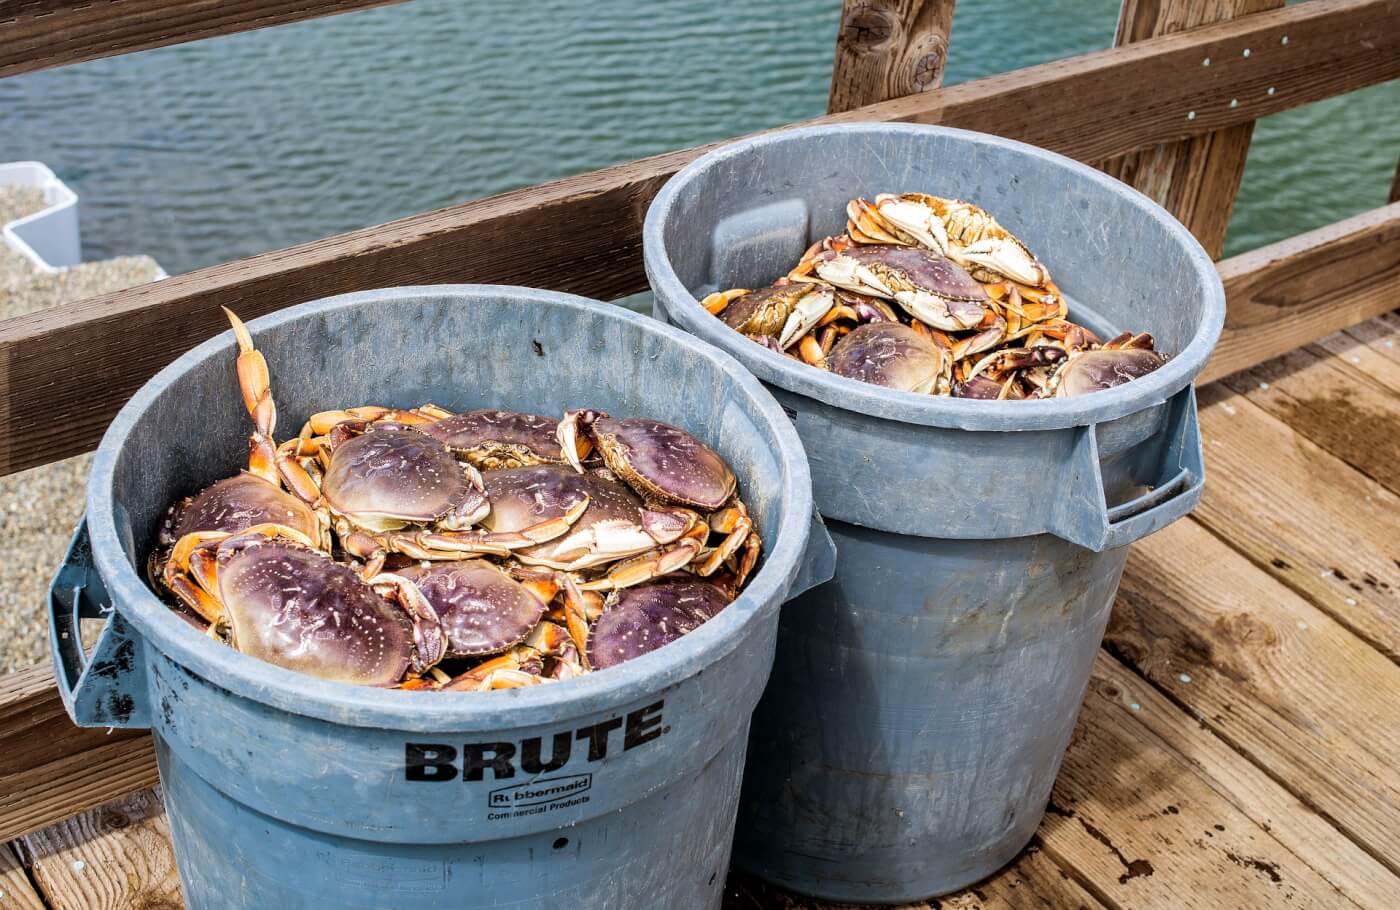 dungeness crabs in trash cans